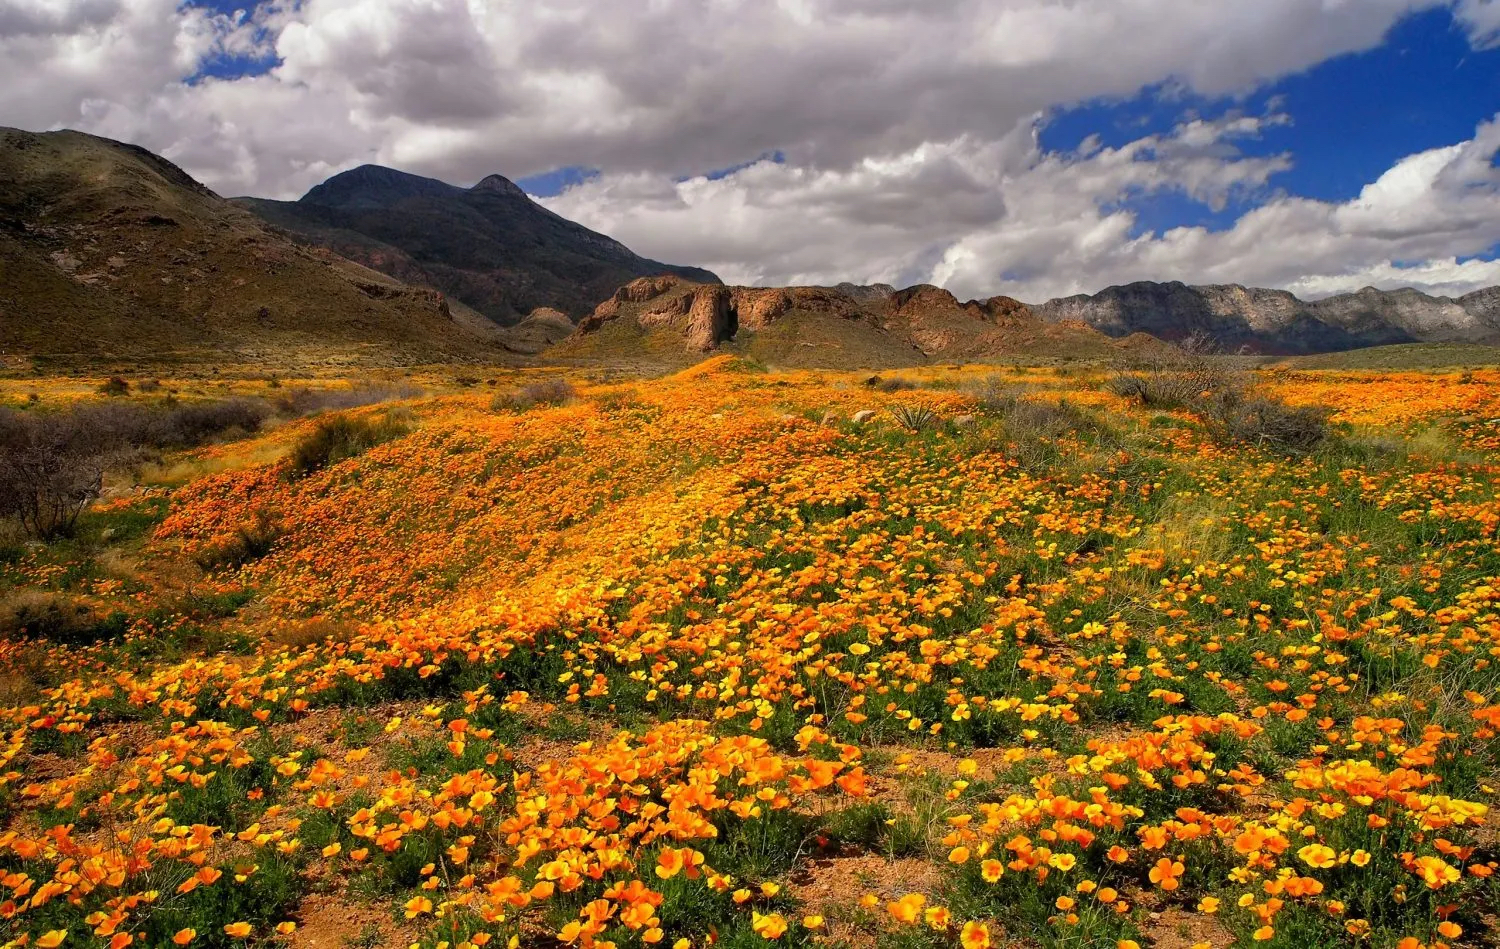 The 52Year Fight to Protect El Paso’s Castner Range Continues